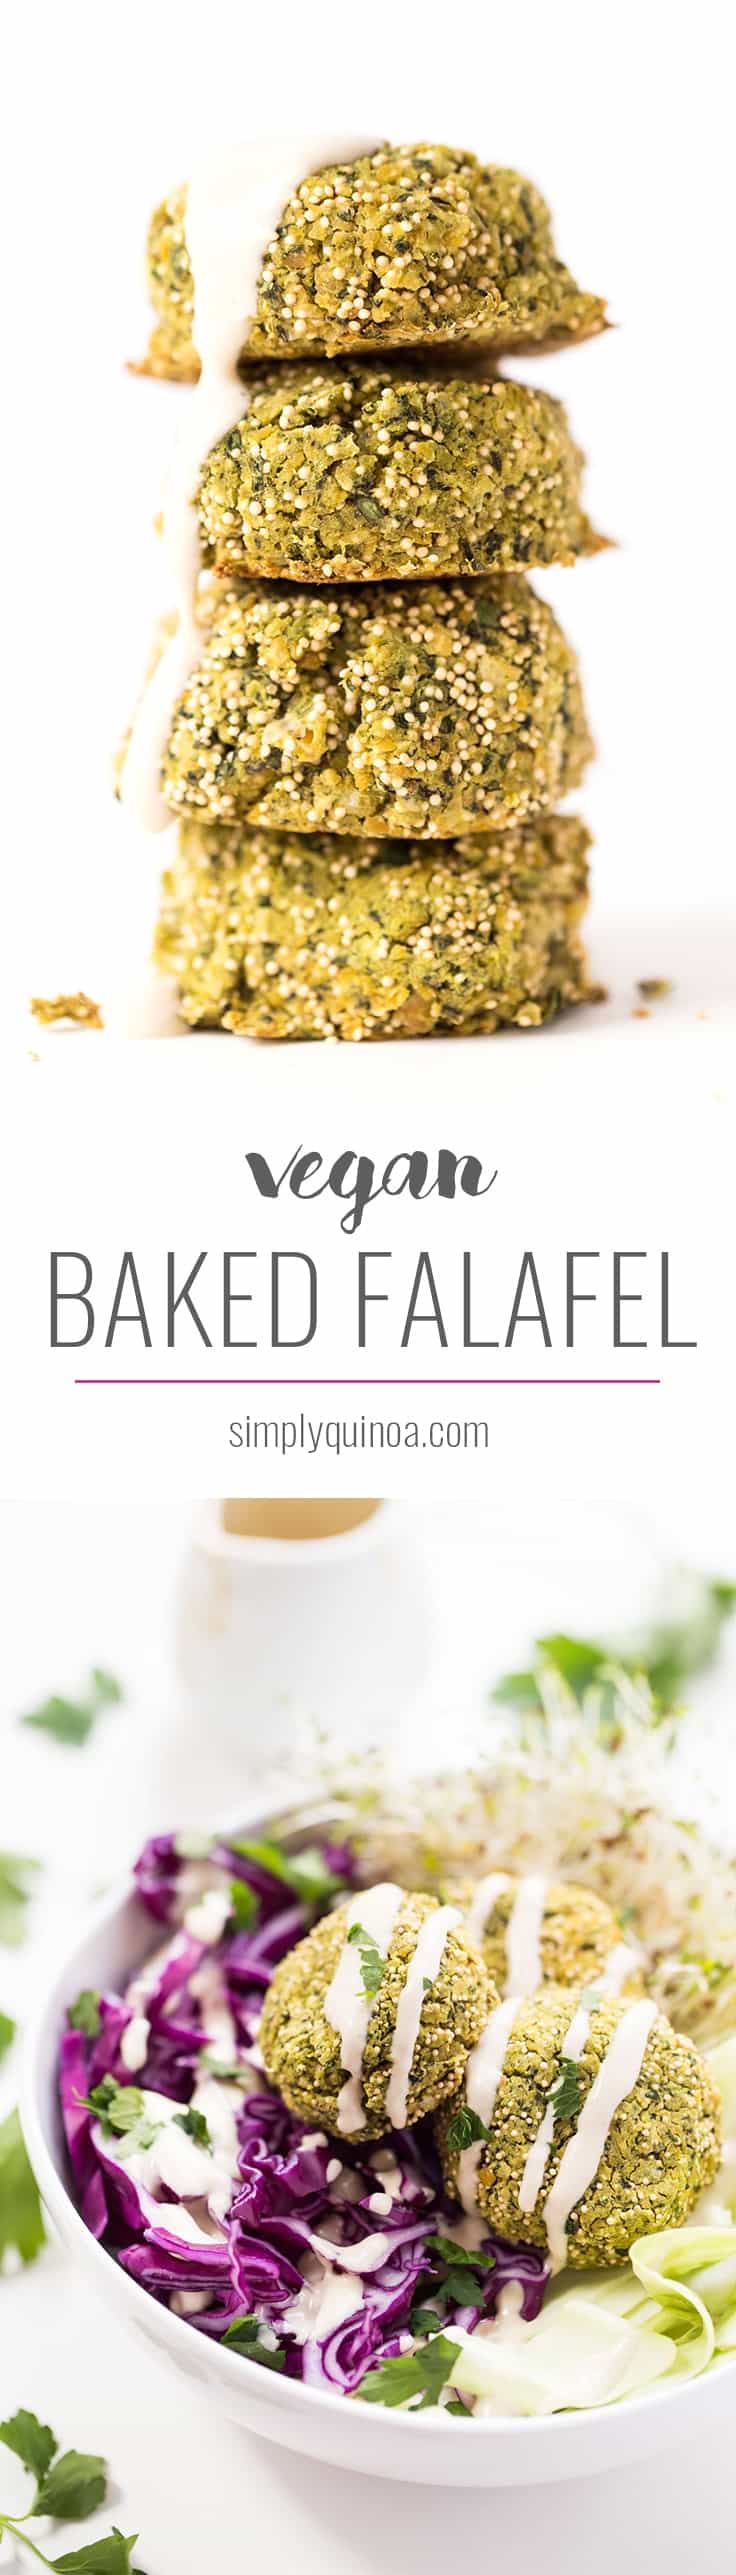 Baked instead of fried, this HEALTHY vegan baked falafel combines protein-rich chickpeas with crunchy amaranth for a nutritious and delicious sandwich filling or topping to your salad!